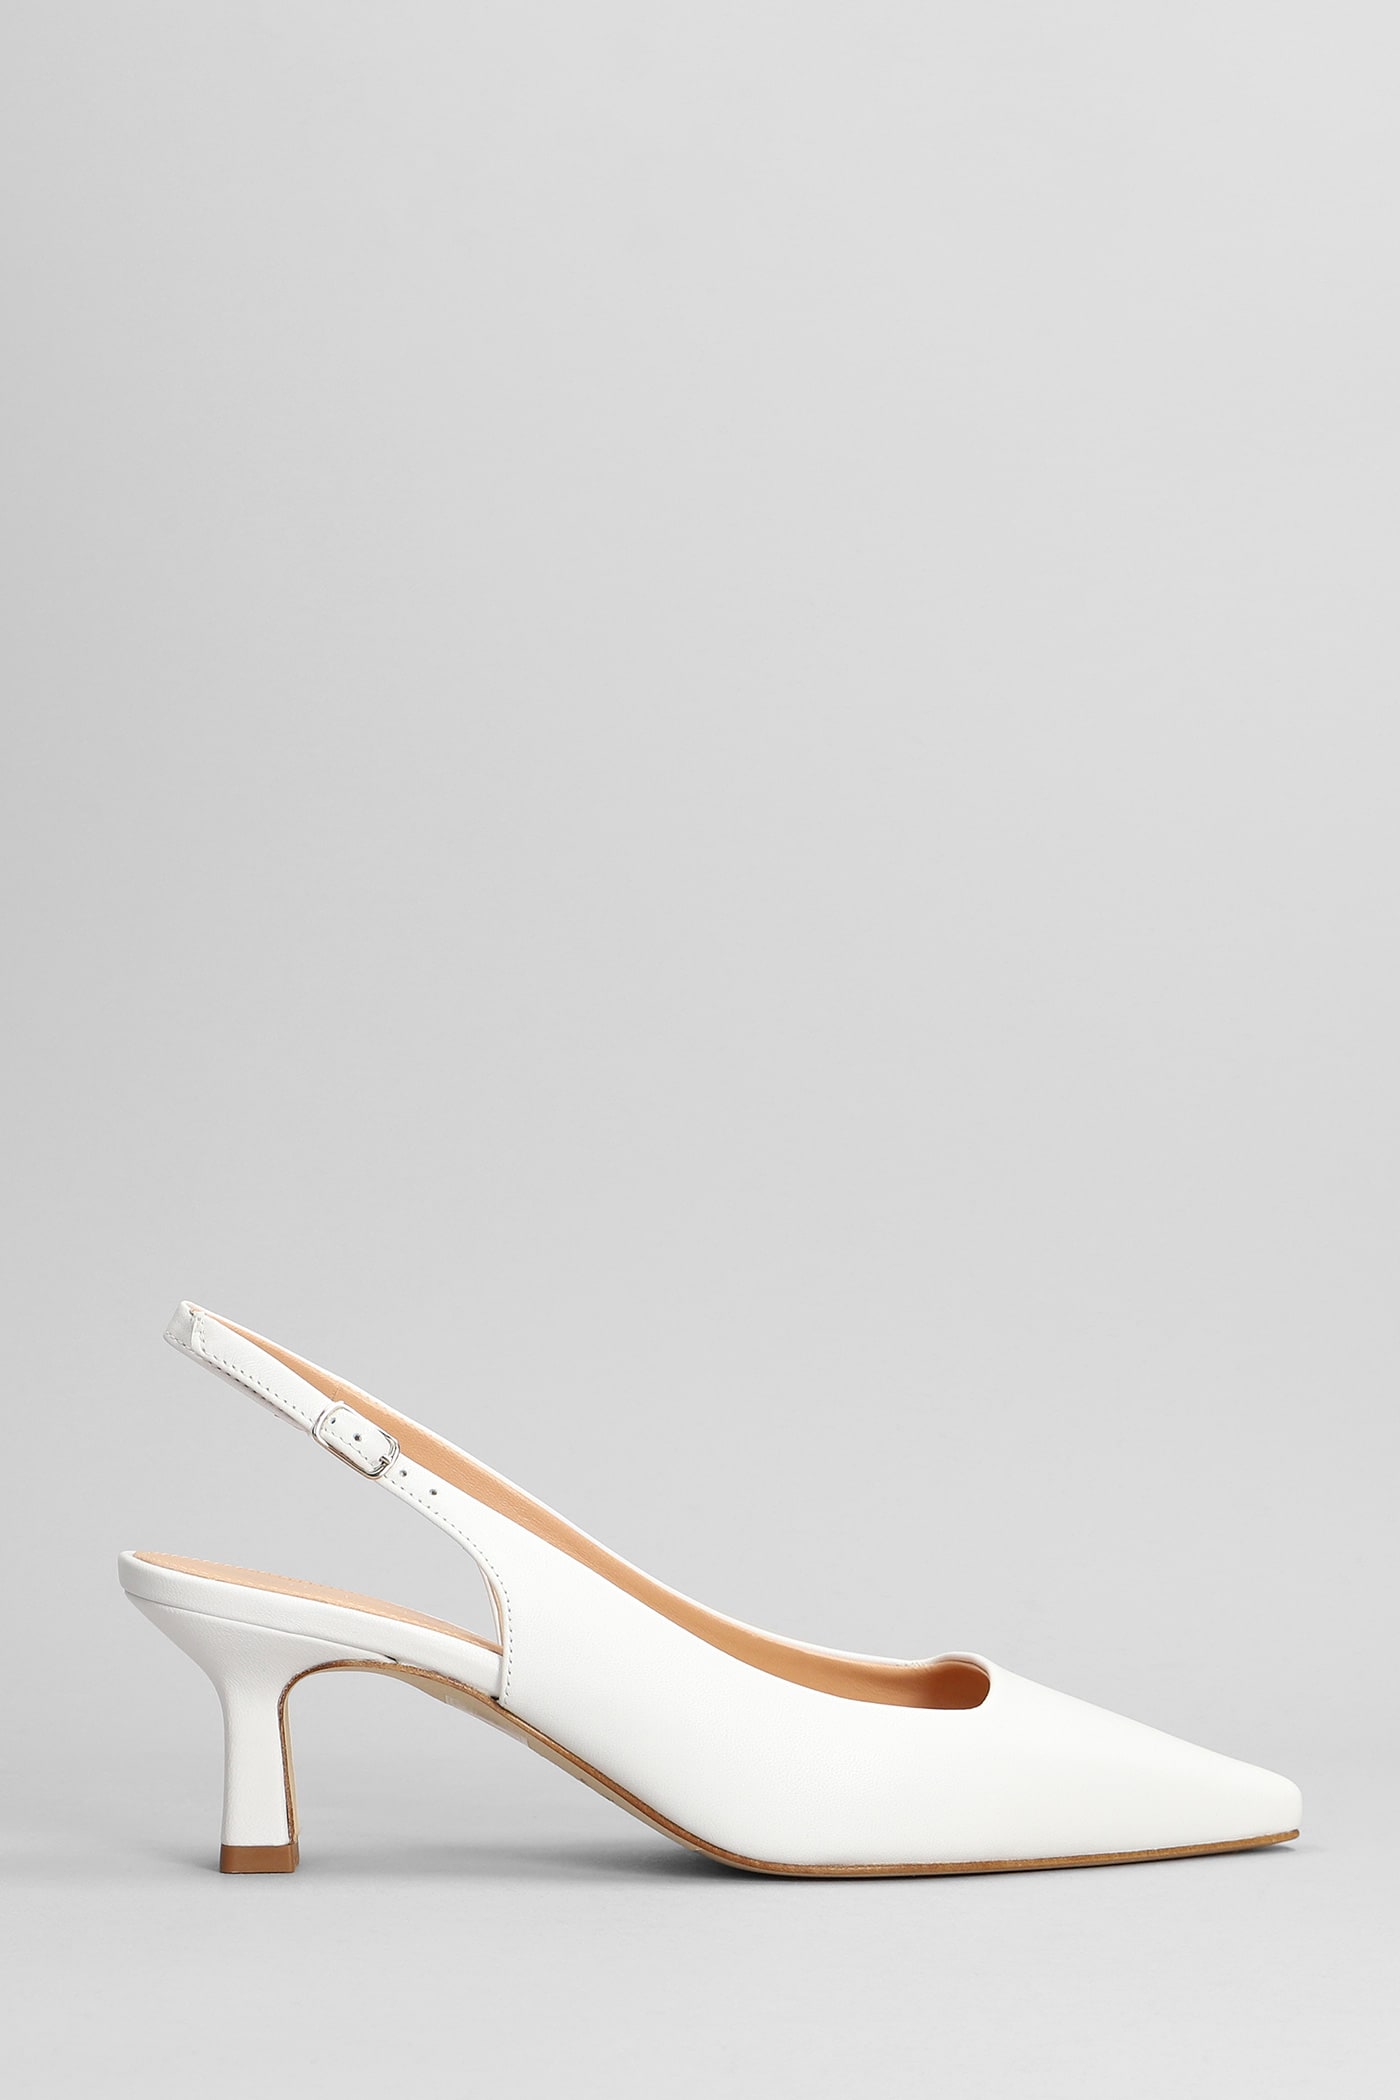 Julie Dee Pumps In White Leather